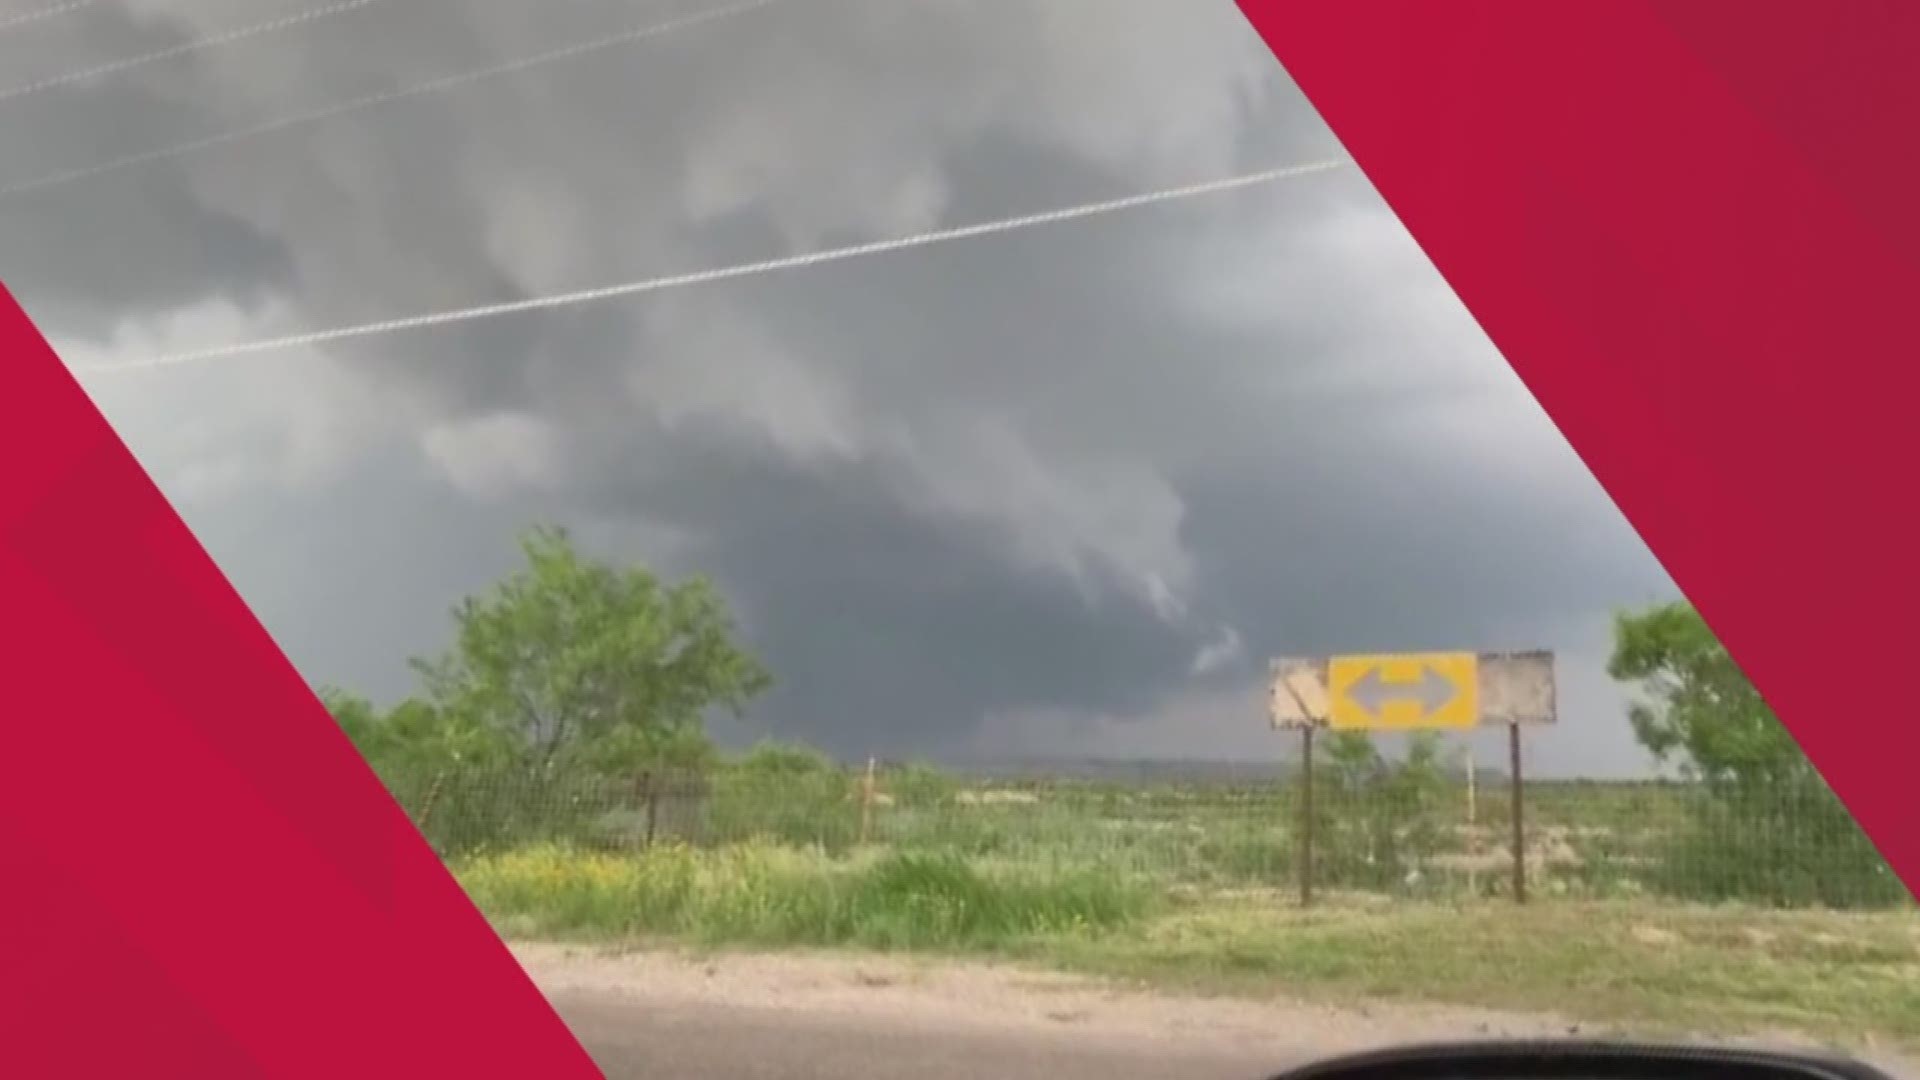 Video footage of the tornado in full force moving east from Fort Stockton.